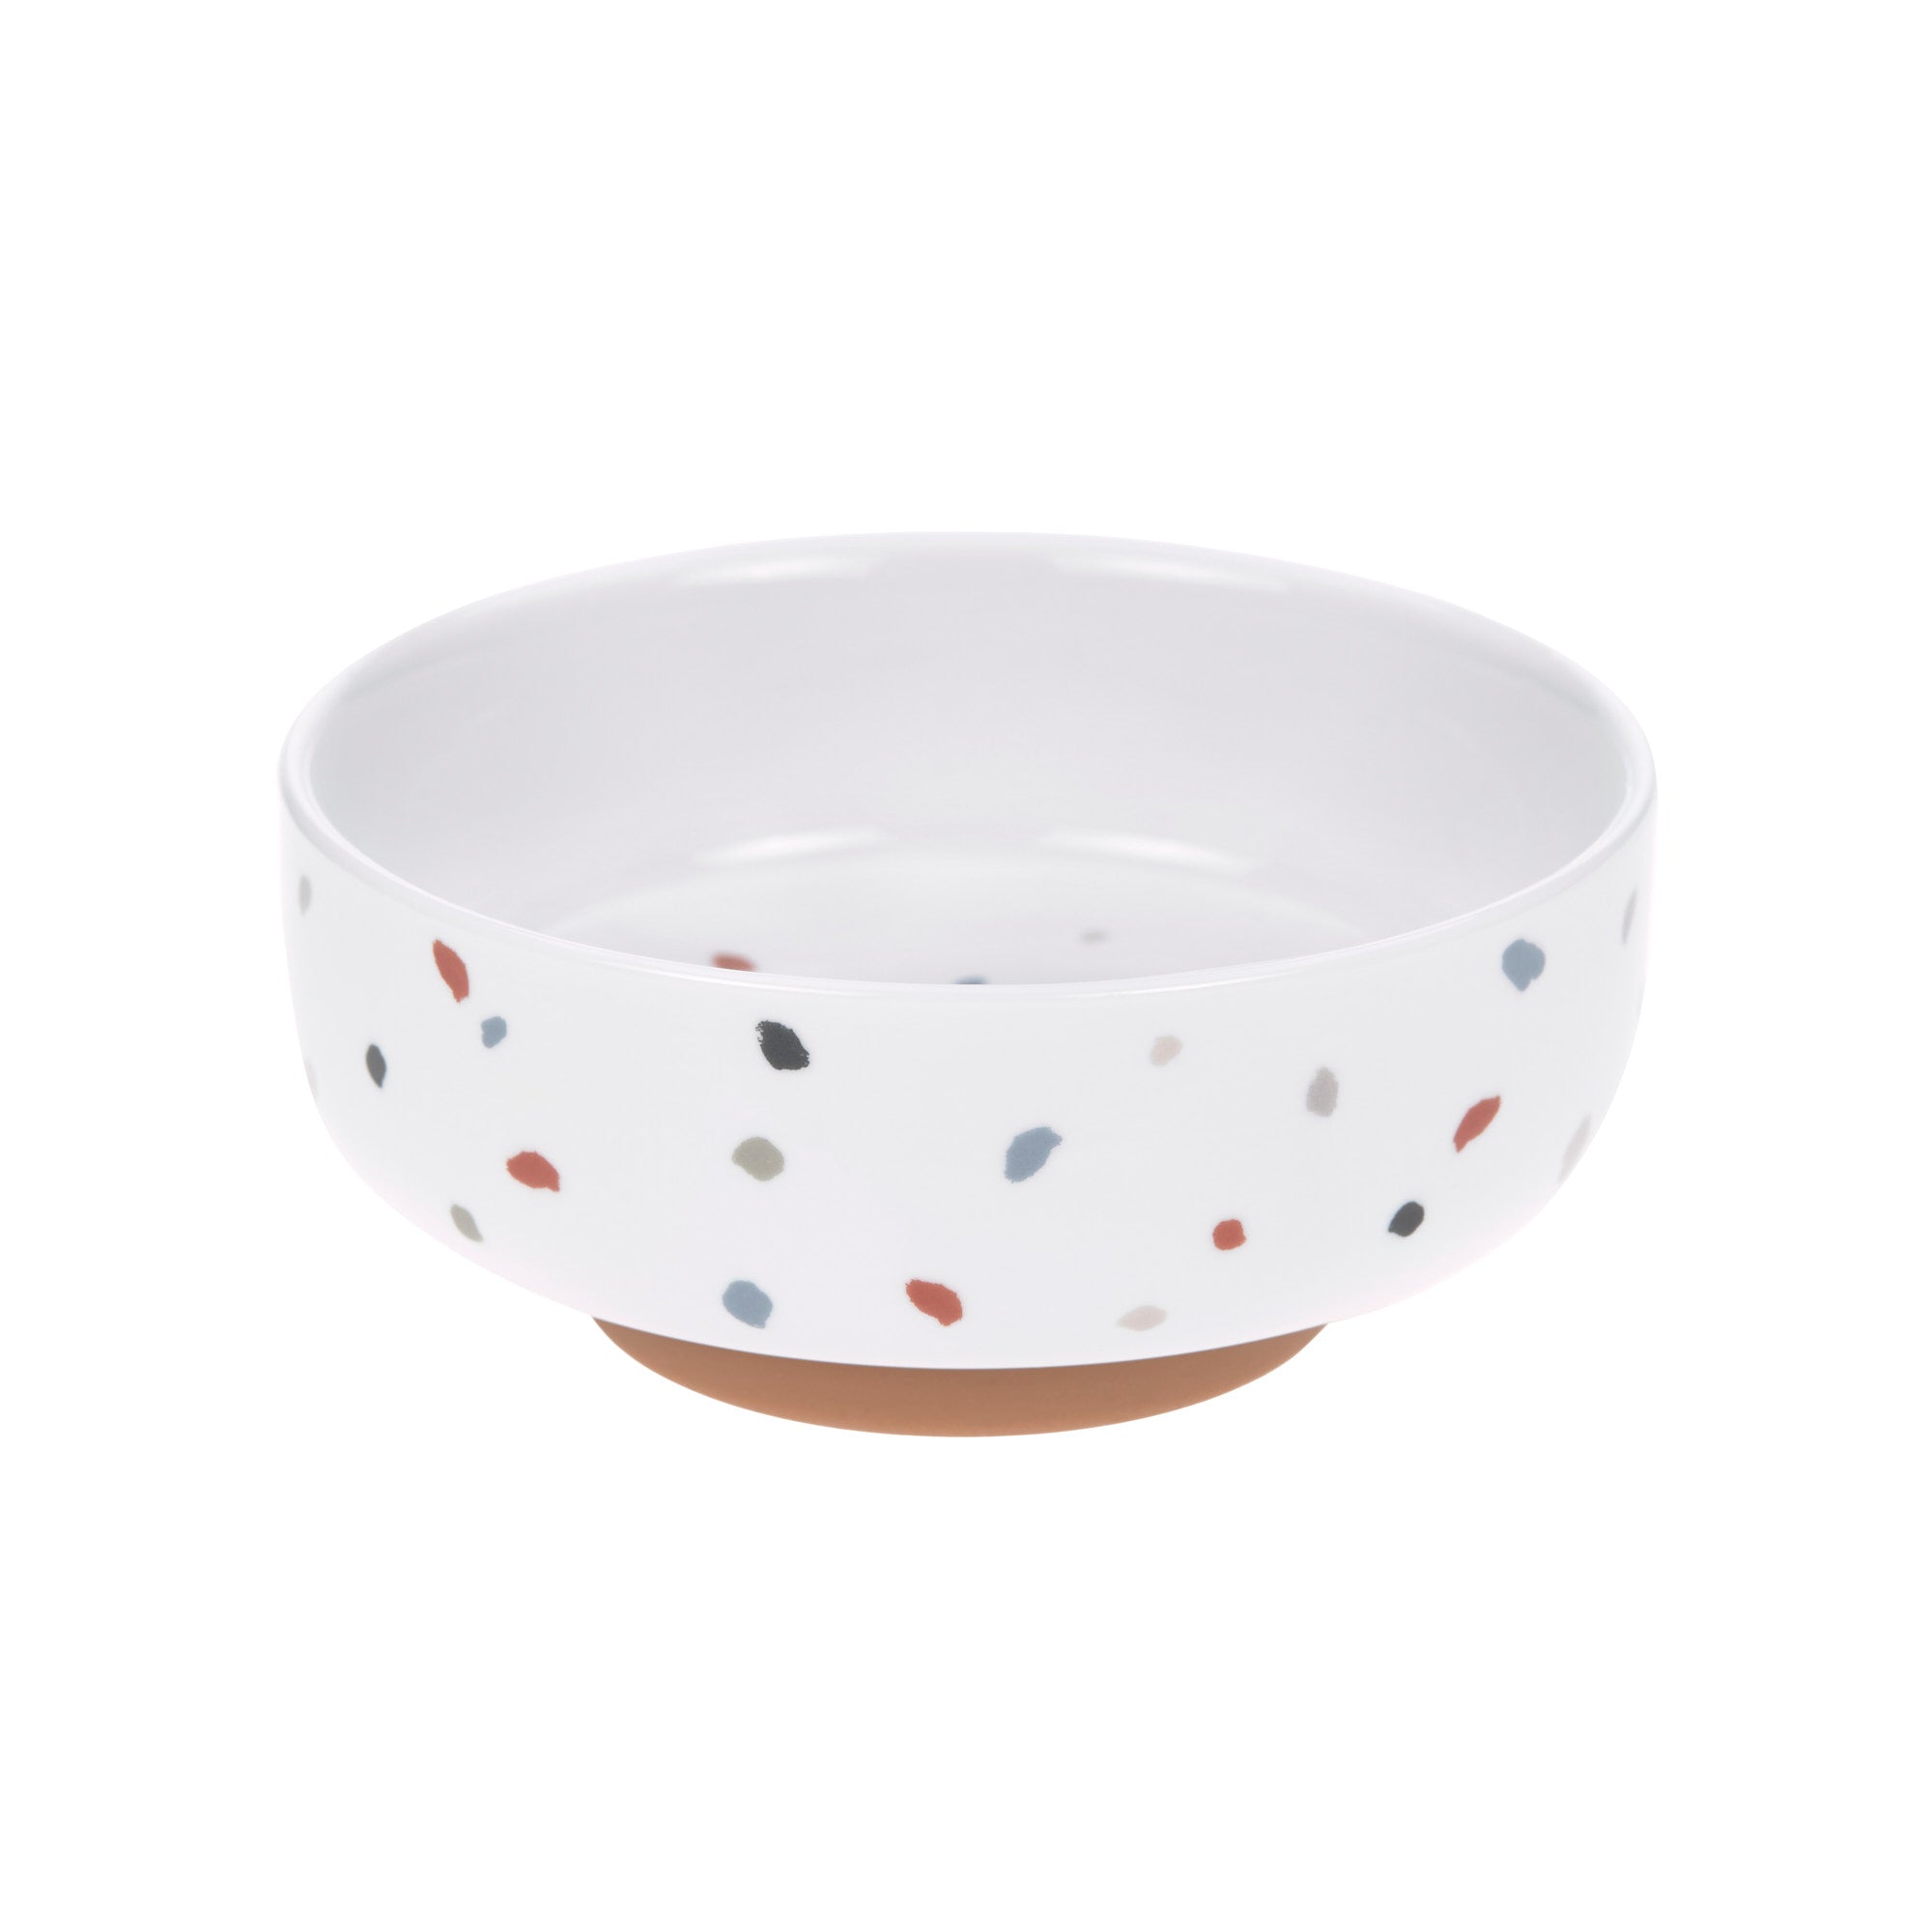 Porcelain children's bowl with silicone ring